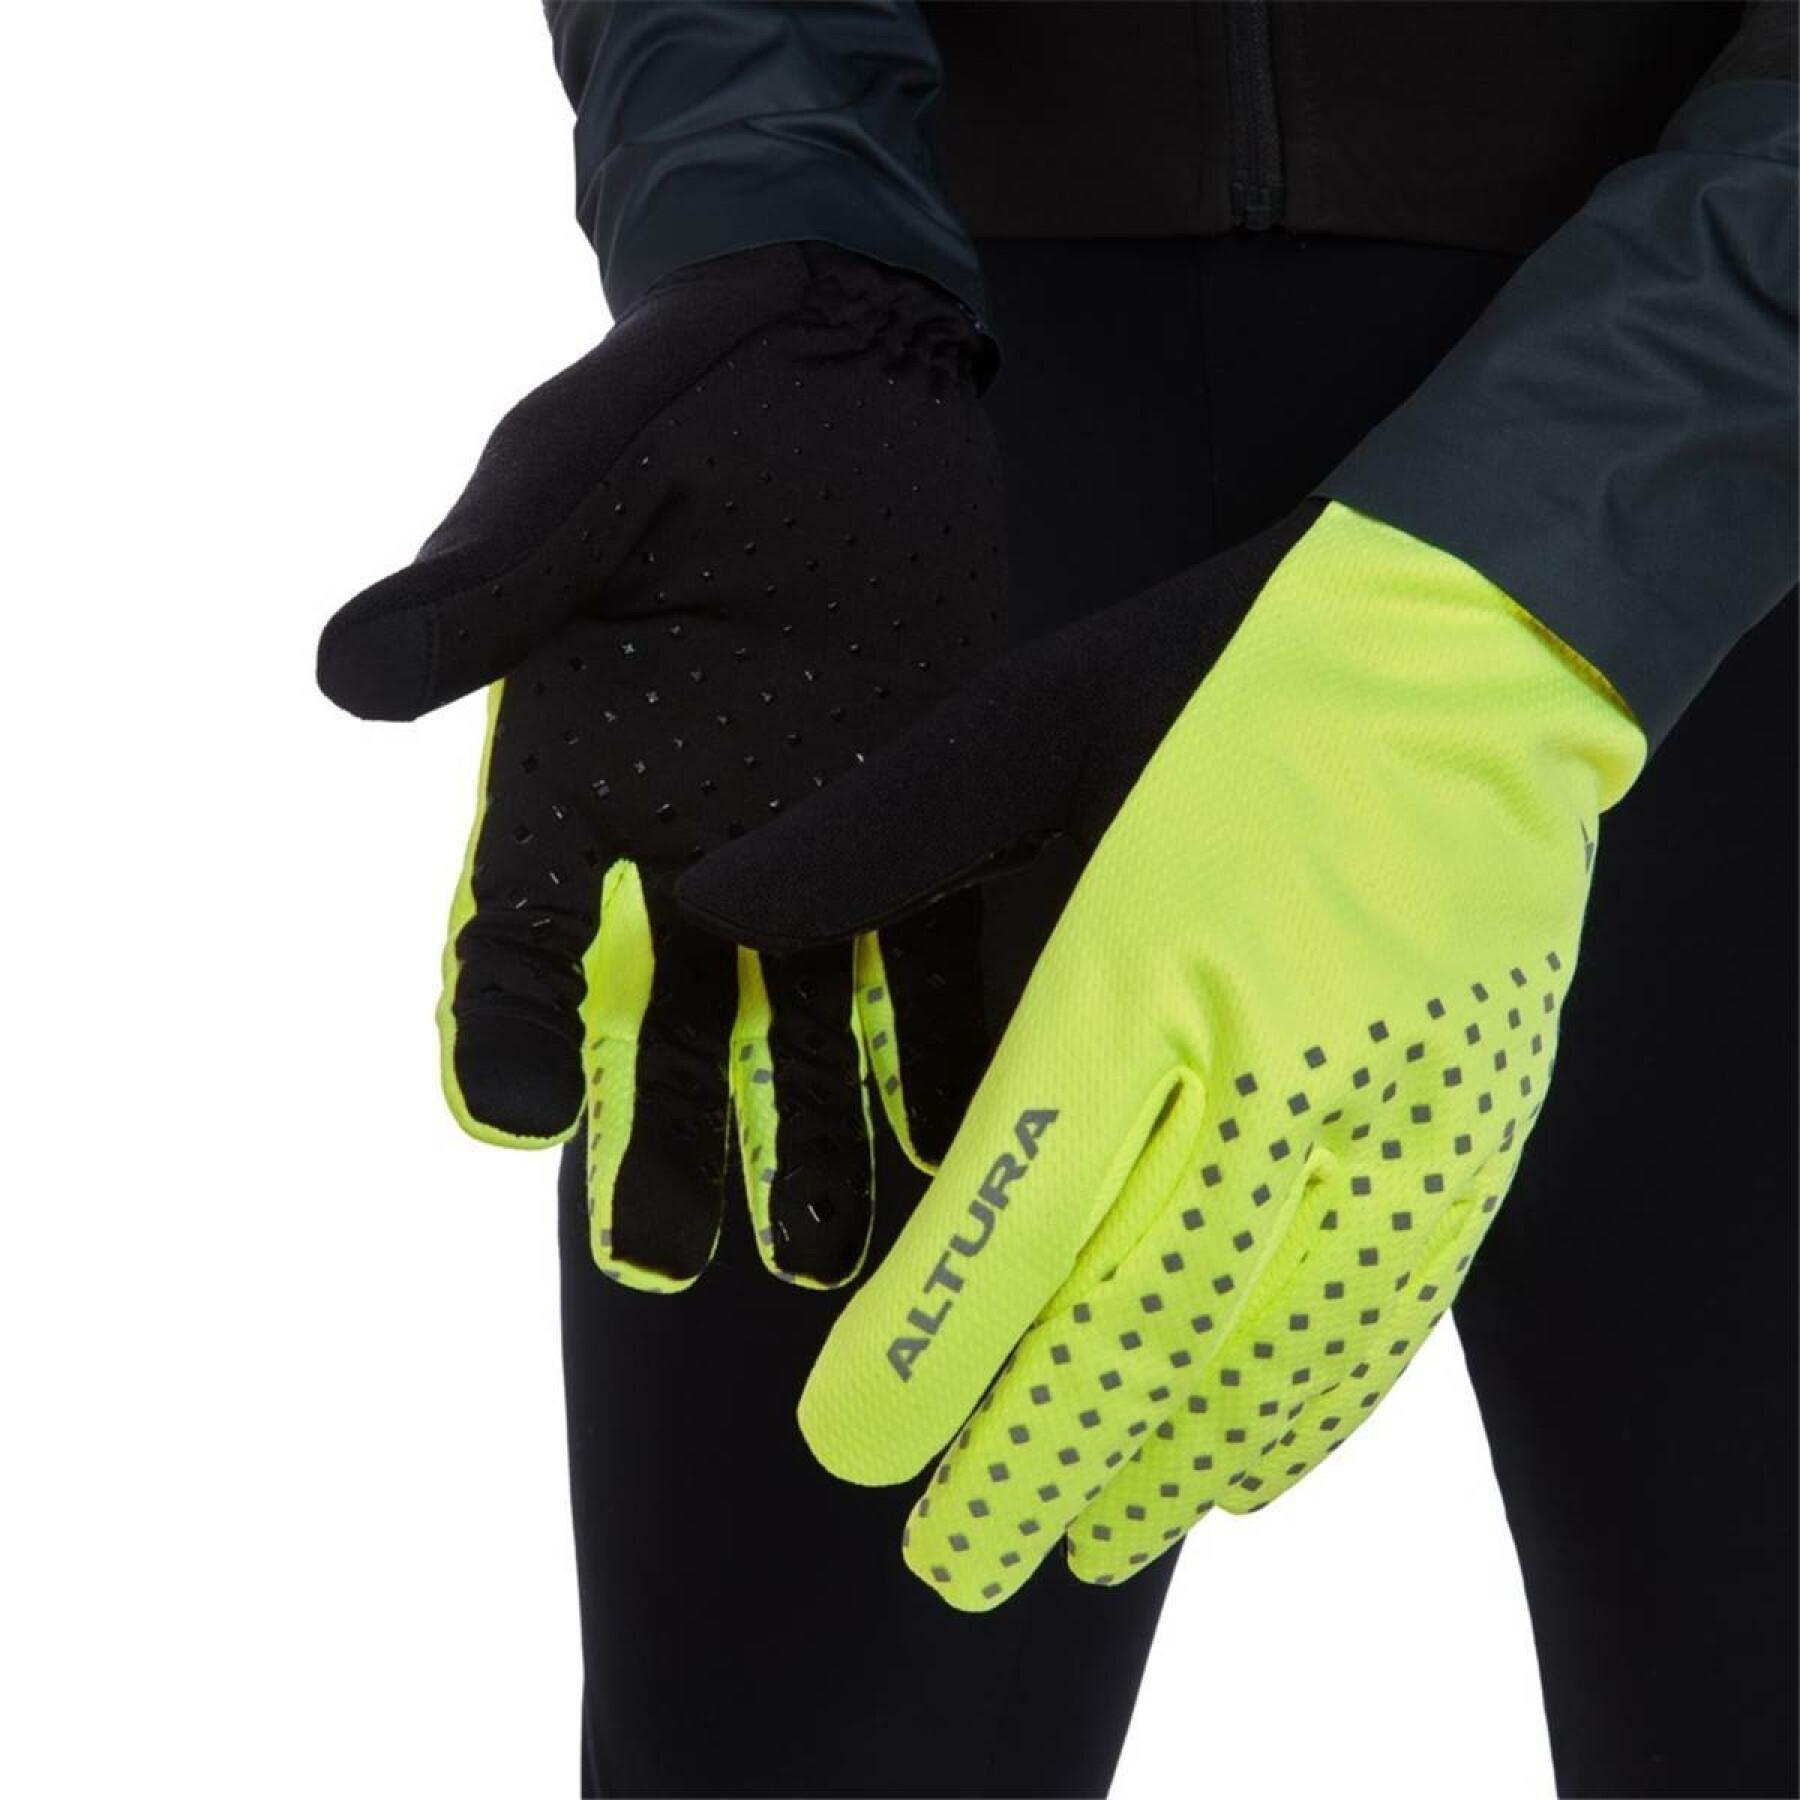 Windproof gloves Altura Thermostretch